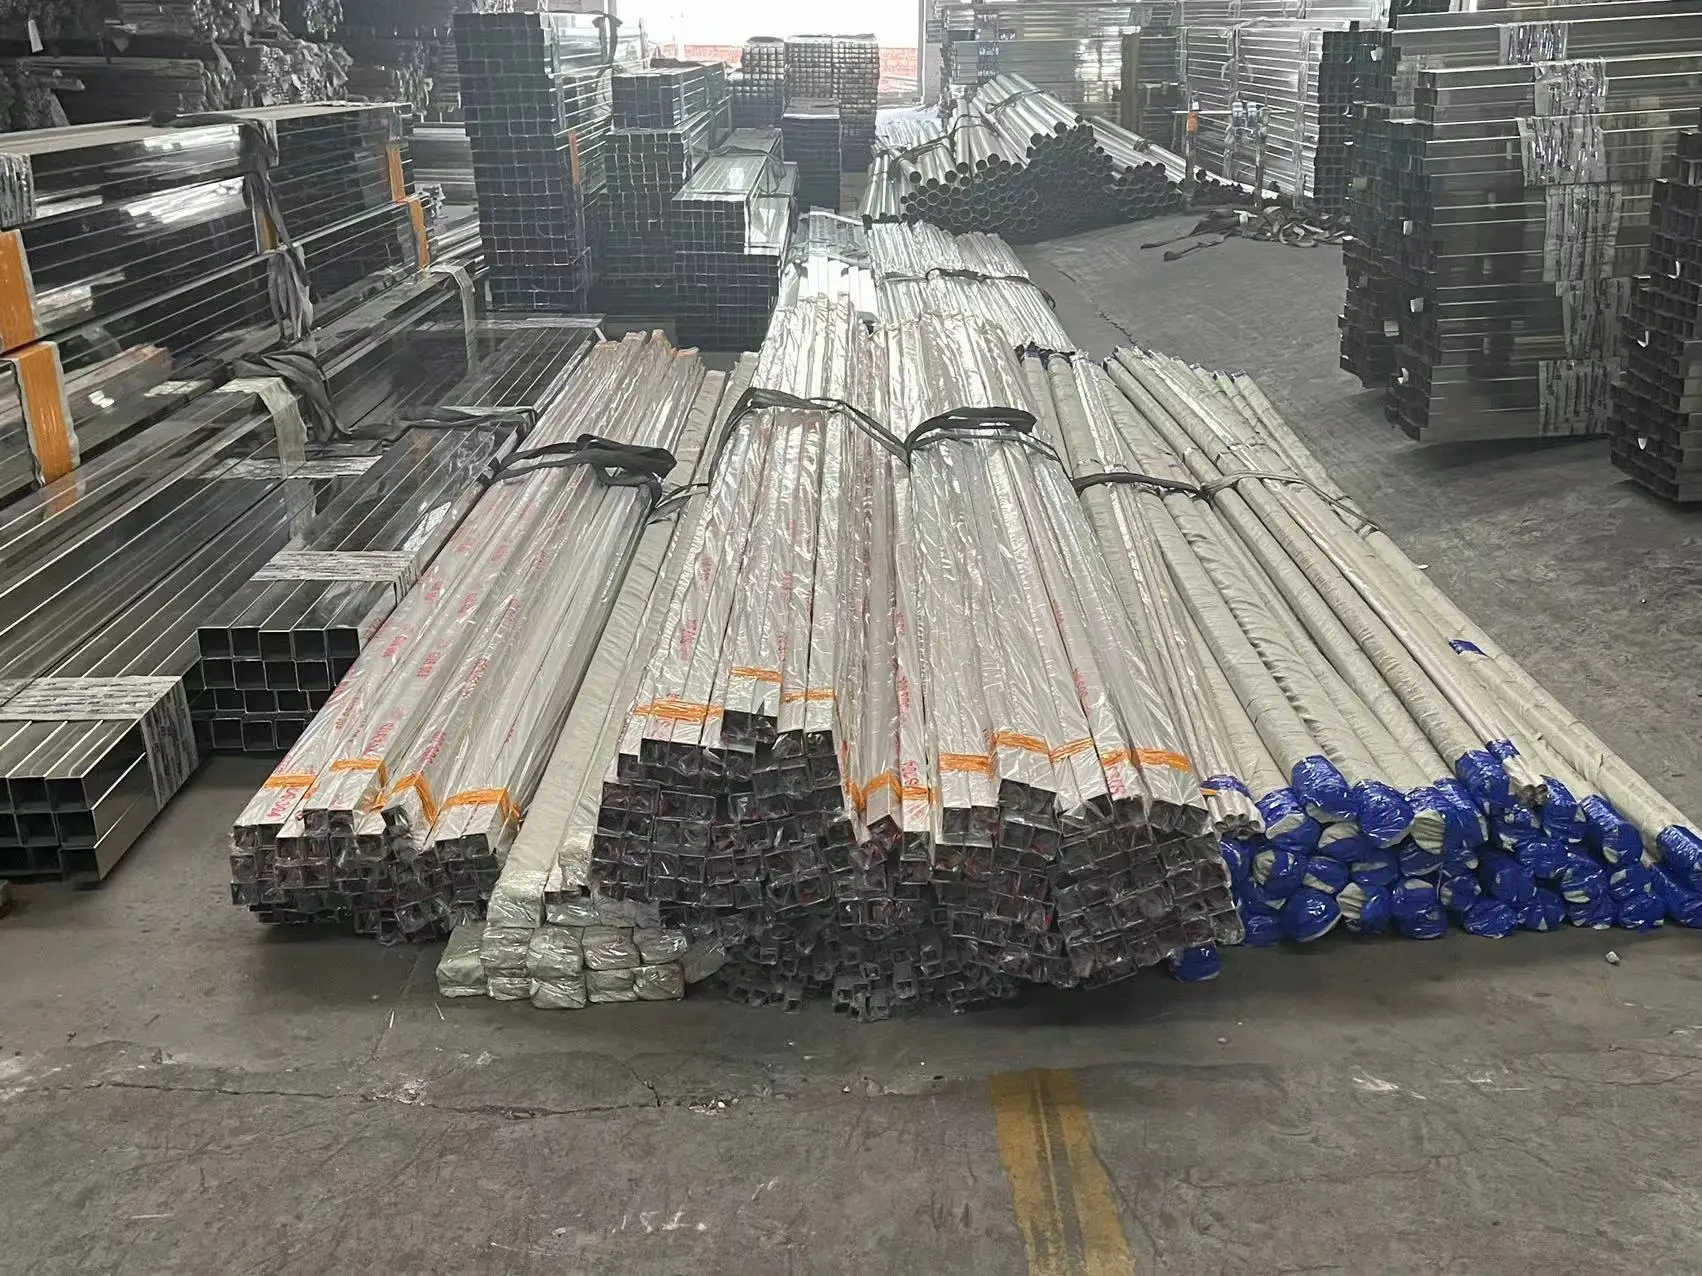 high quarlity manufacturer Grade 2B stainless steel square pipe tube